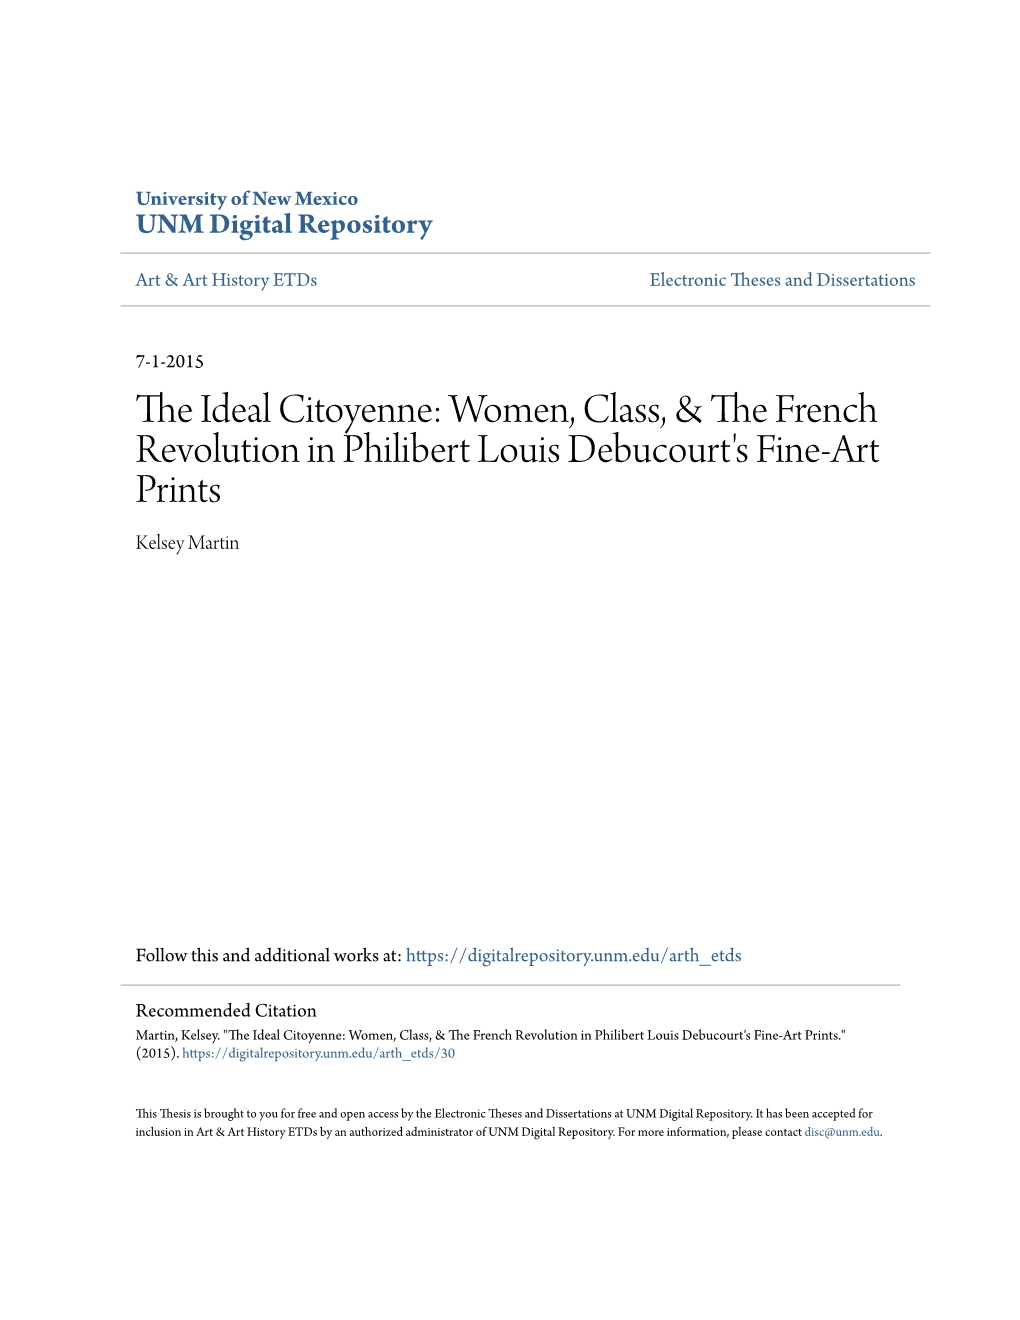 The Ideal Citoyenne: Women, Class, & the French Revolution in Philibert